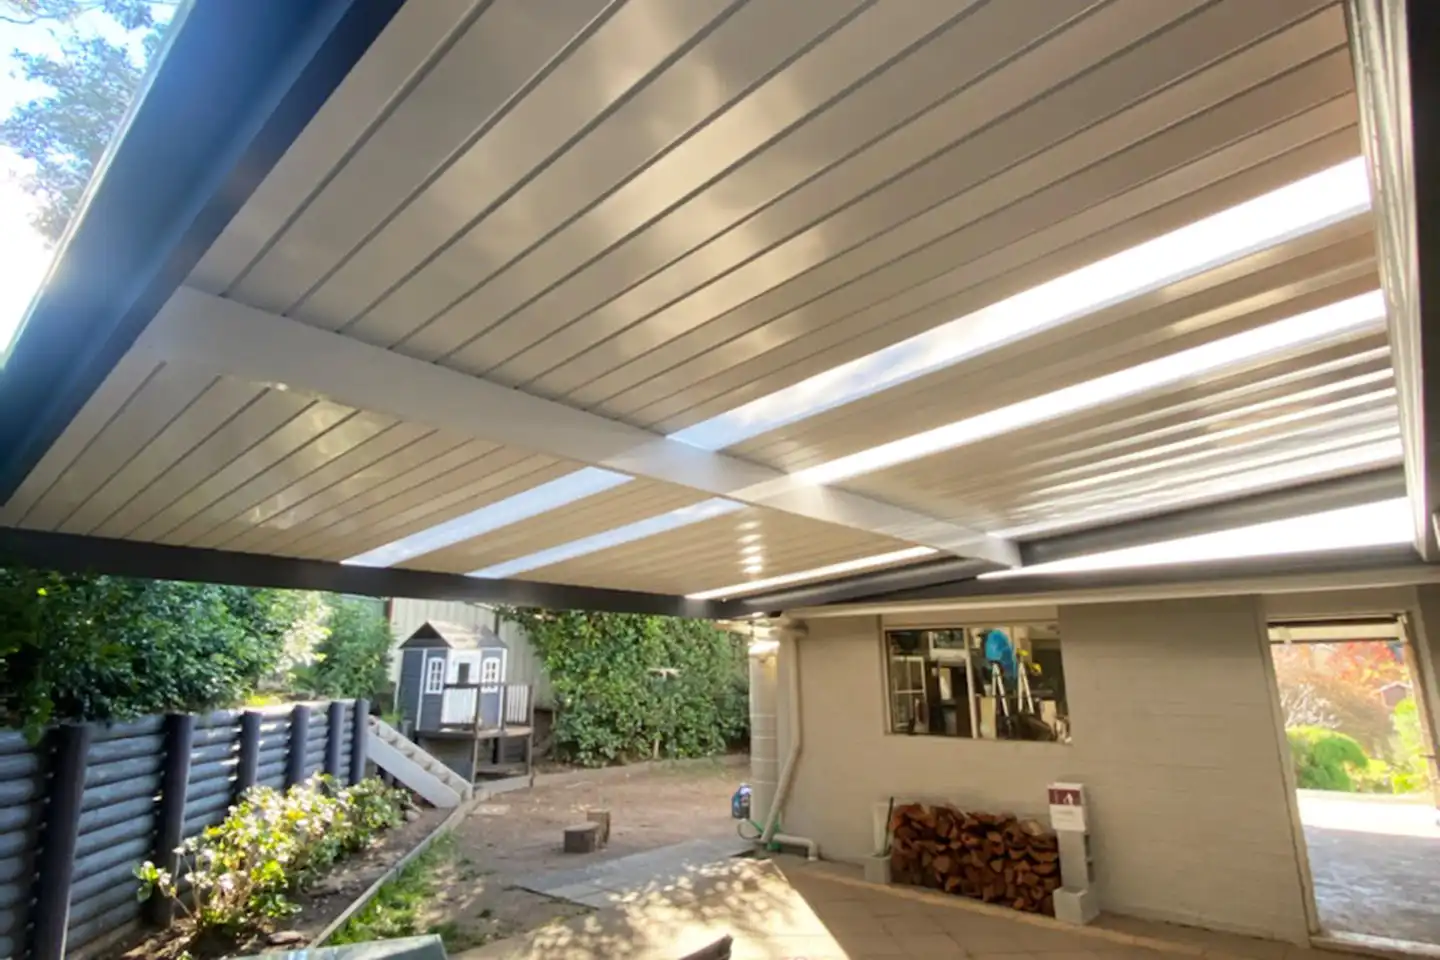 compact retractable roof system